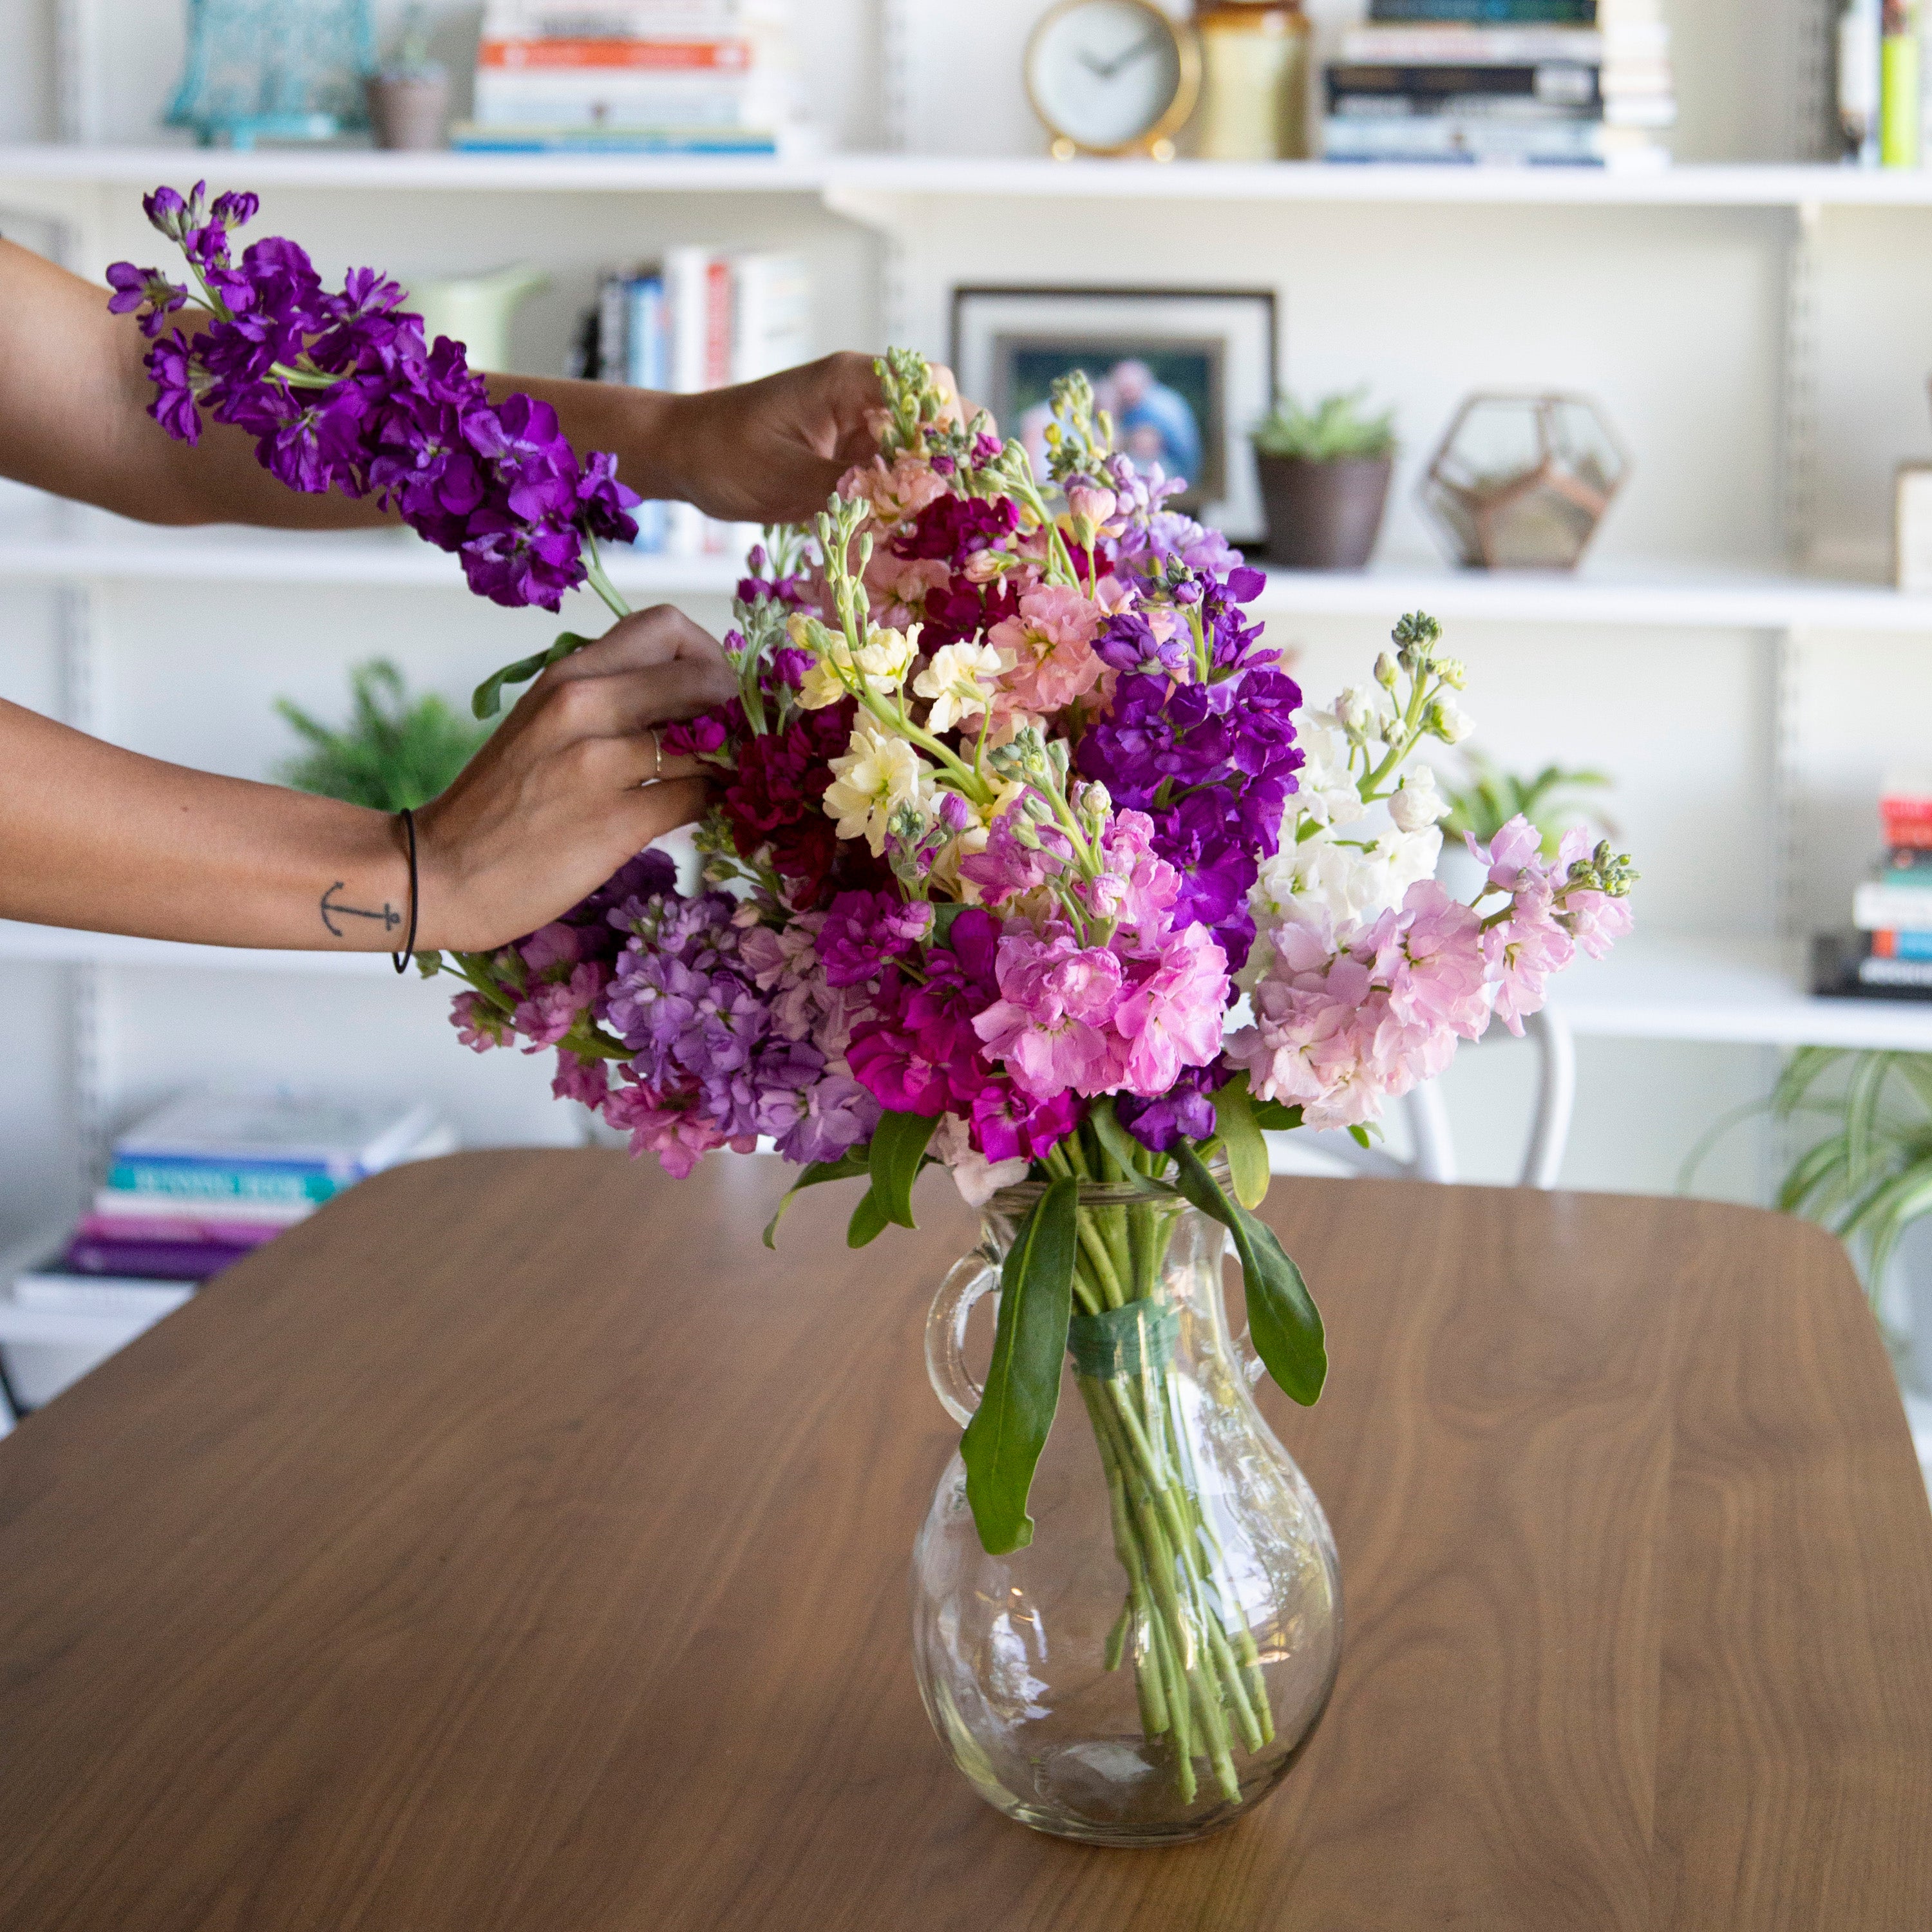 purple, pink, and light pink stock flowers in a vase being arranged with two hands